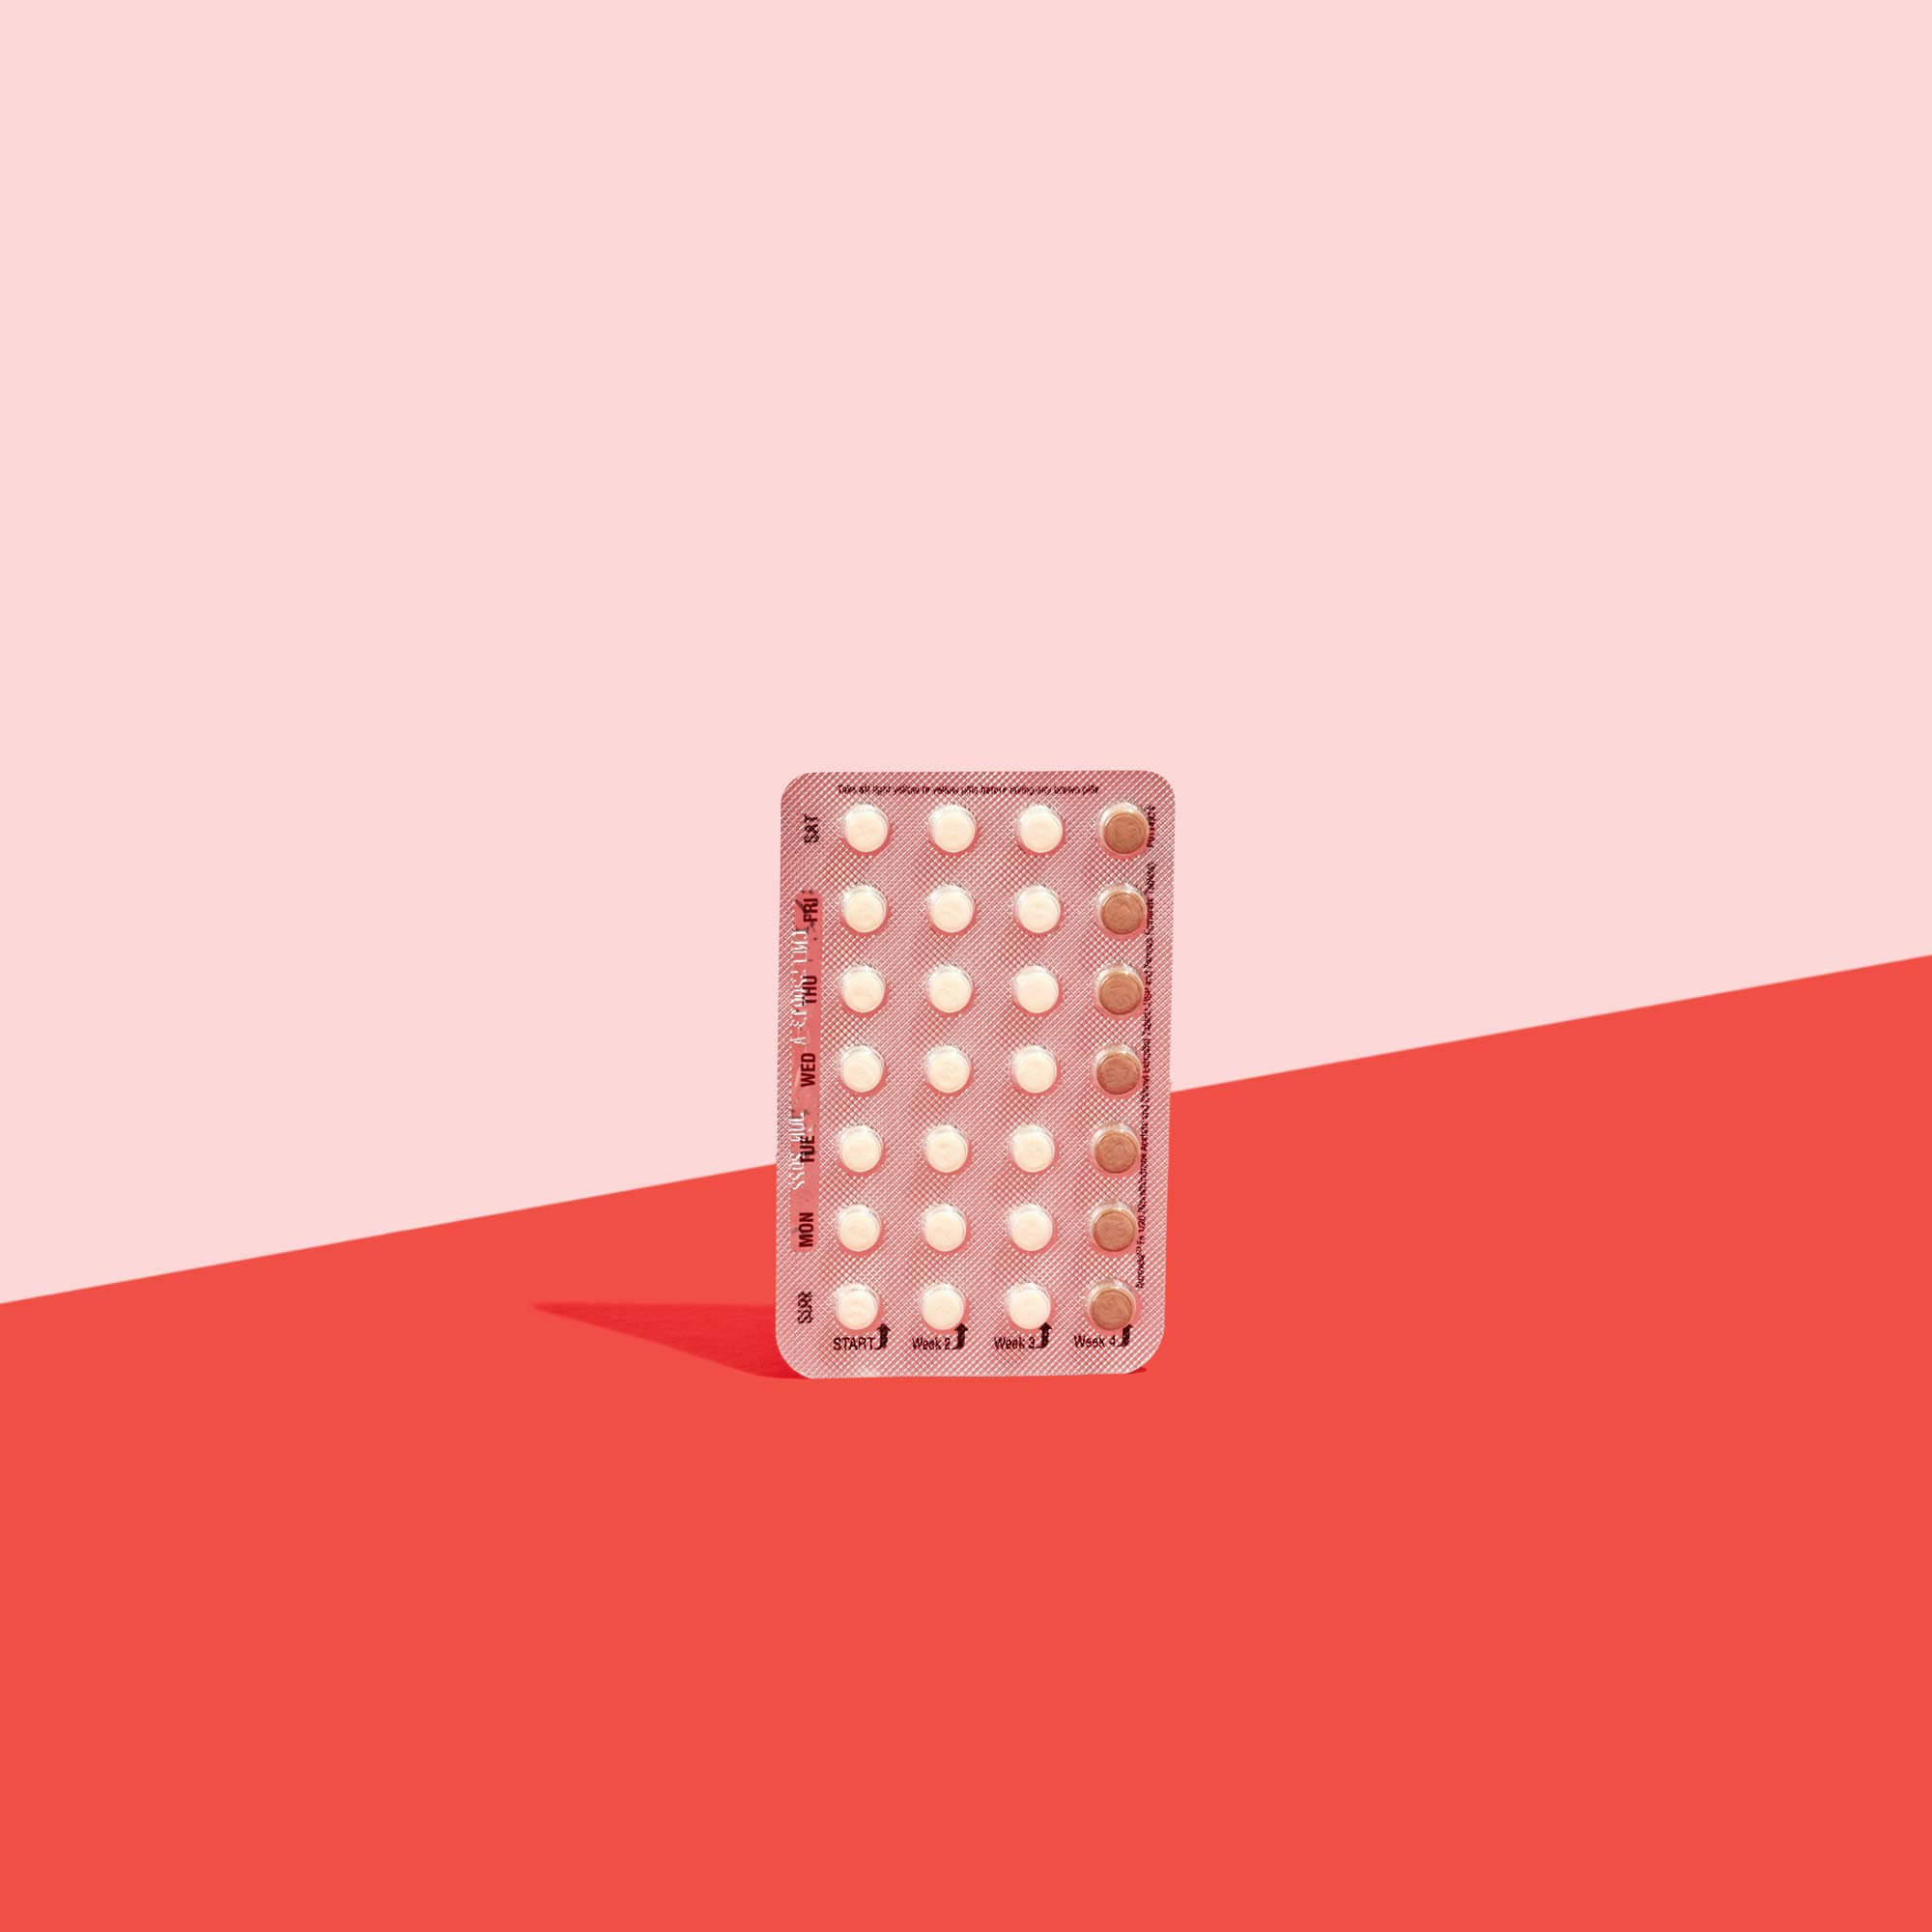 How to Skip a Period With Birth Control Pills